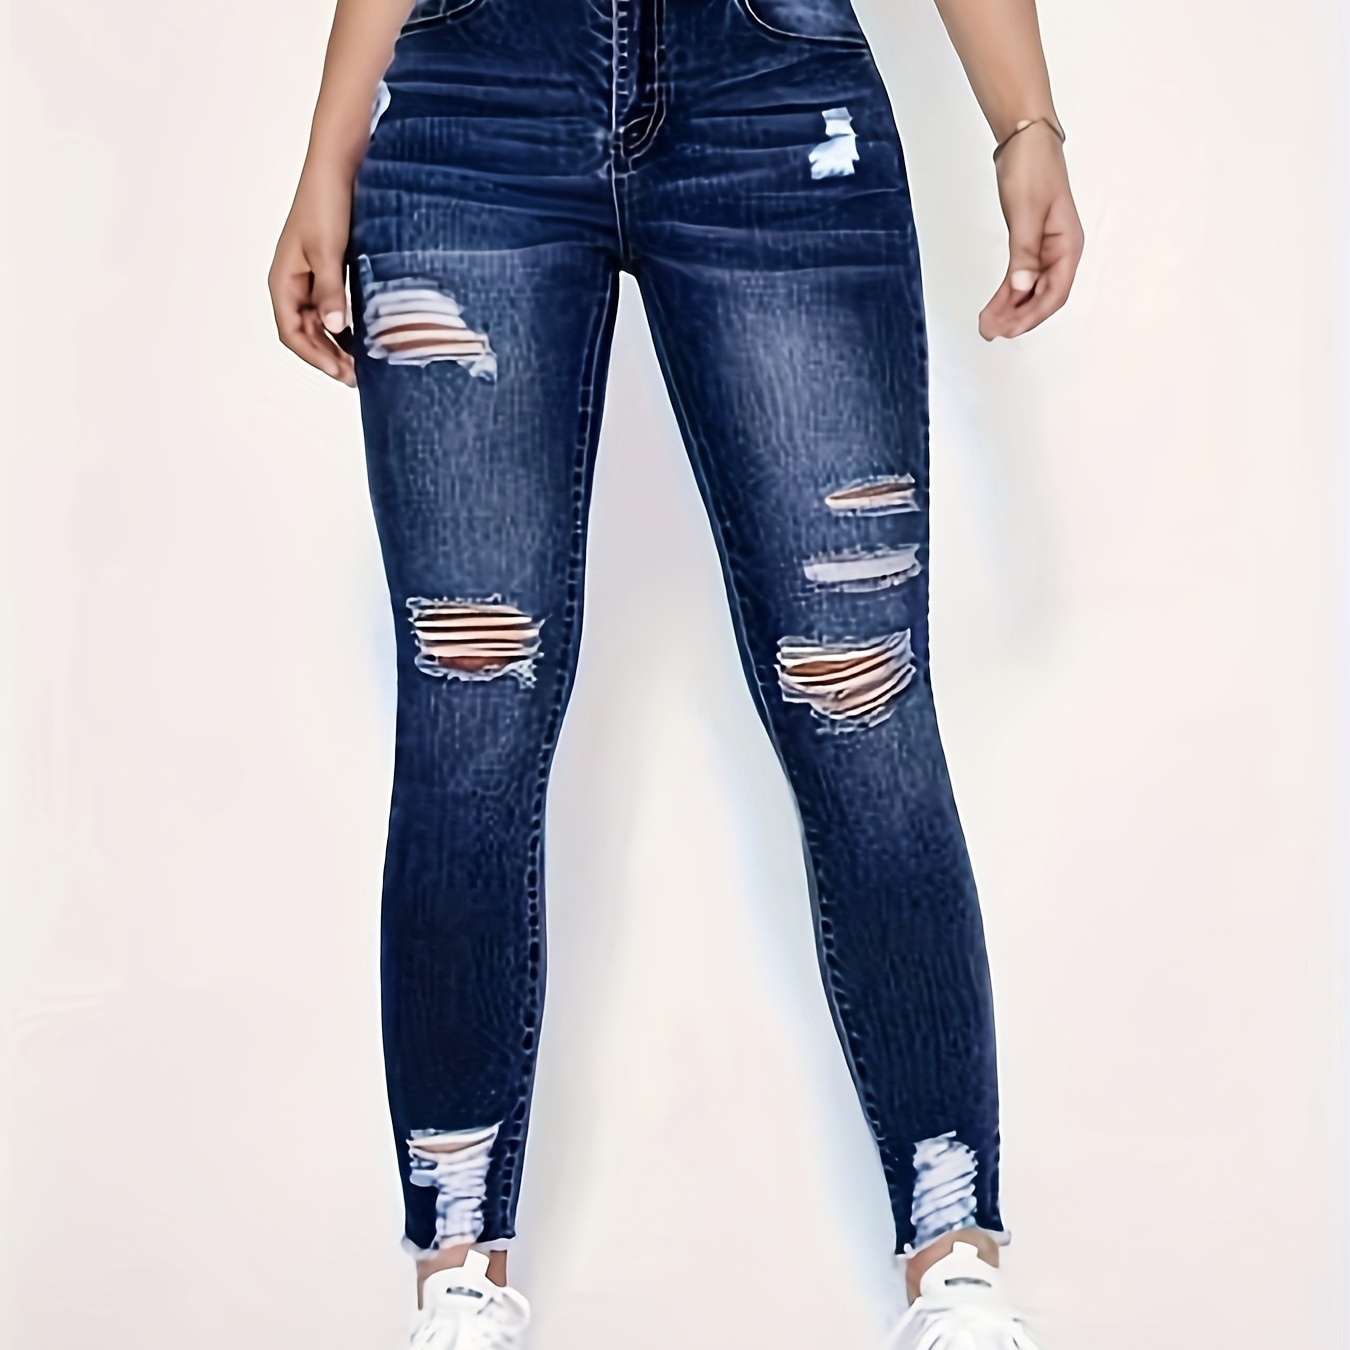 

Women's Skinny Ripped Jeans, High-waist Frayed Hem, Distressed Washed Denim Pants, Street Style